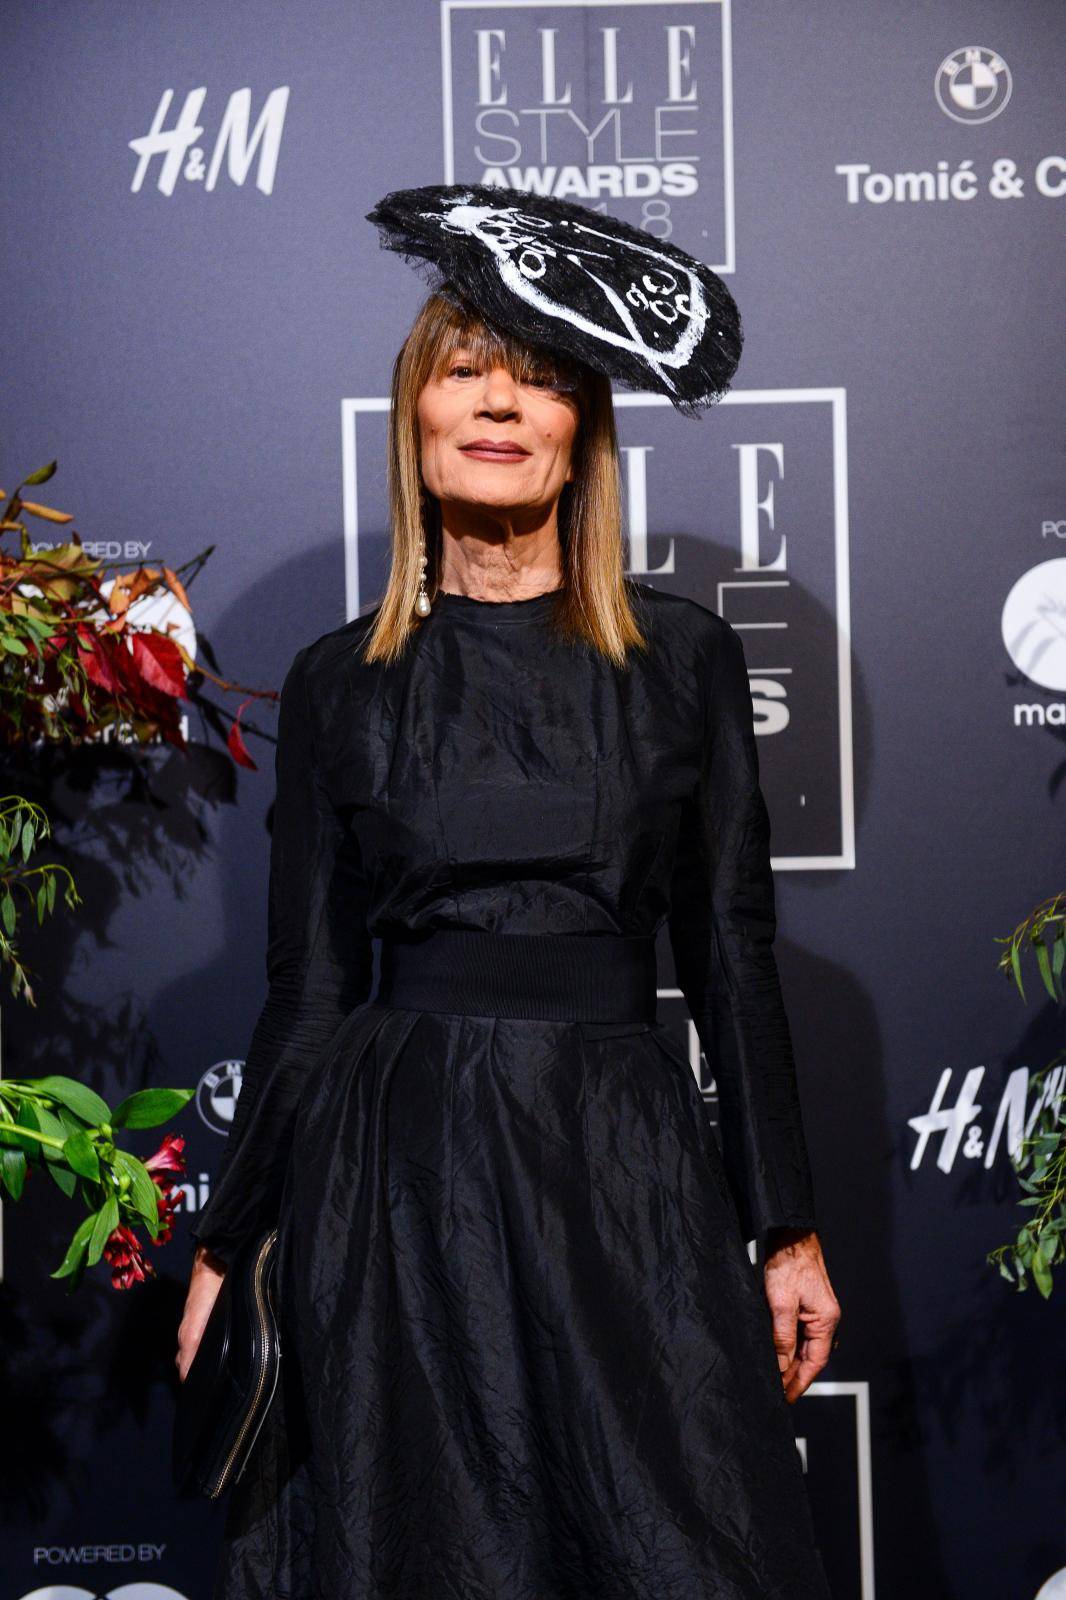 Zagreb:16. ELLE Style Awards powered by Mastercard